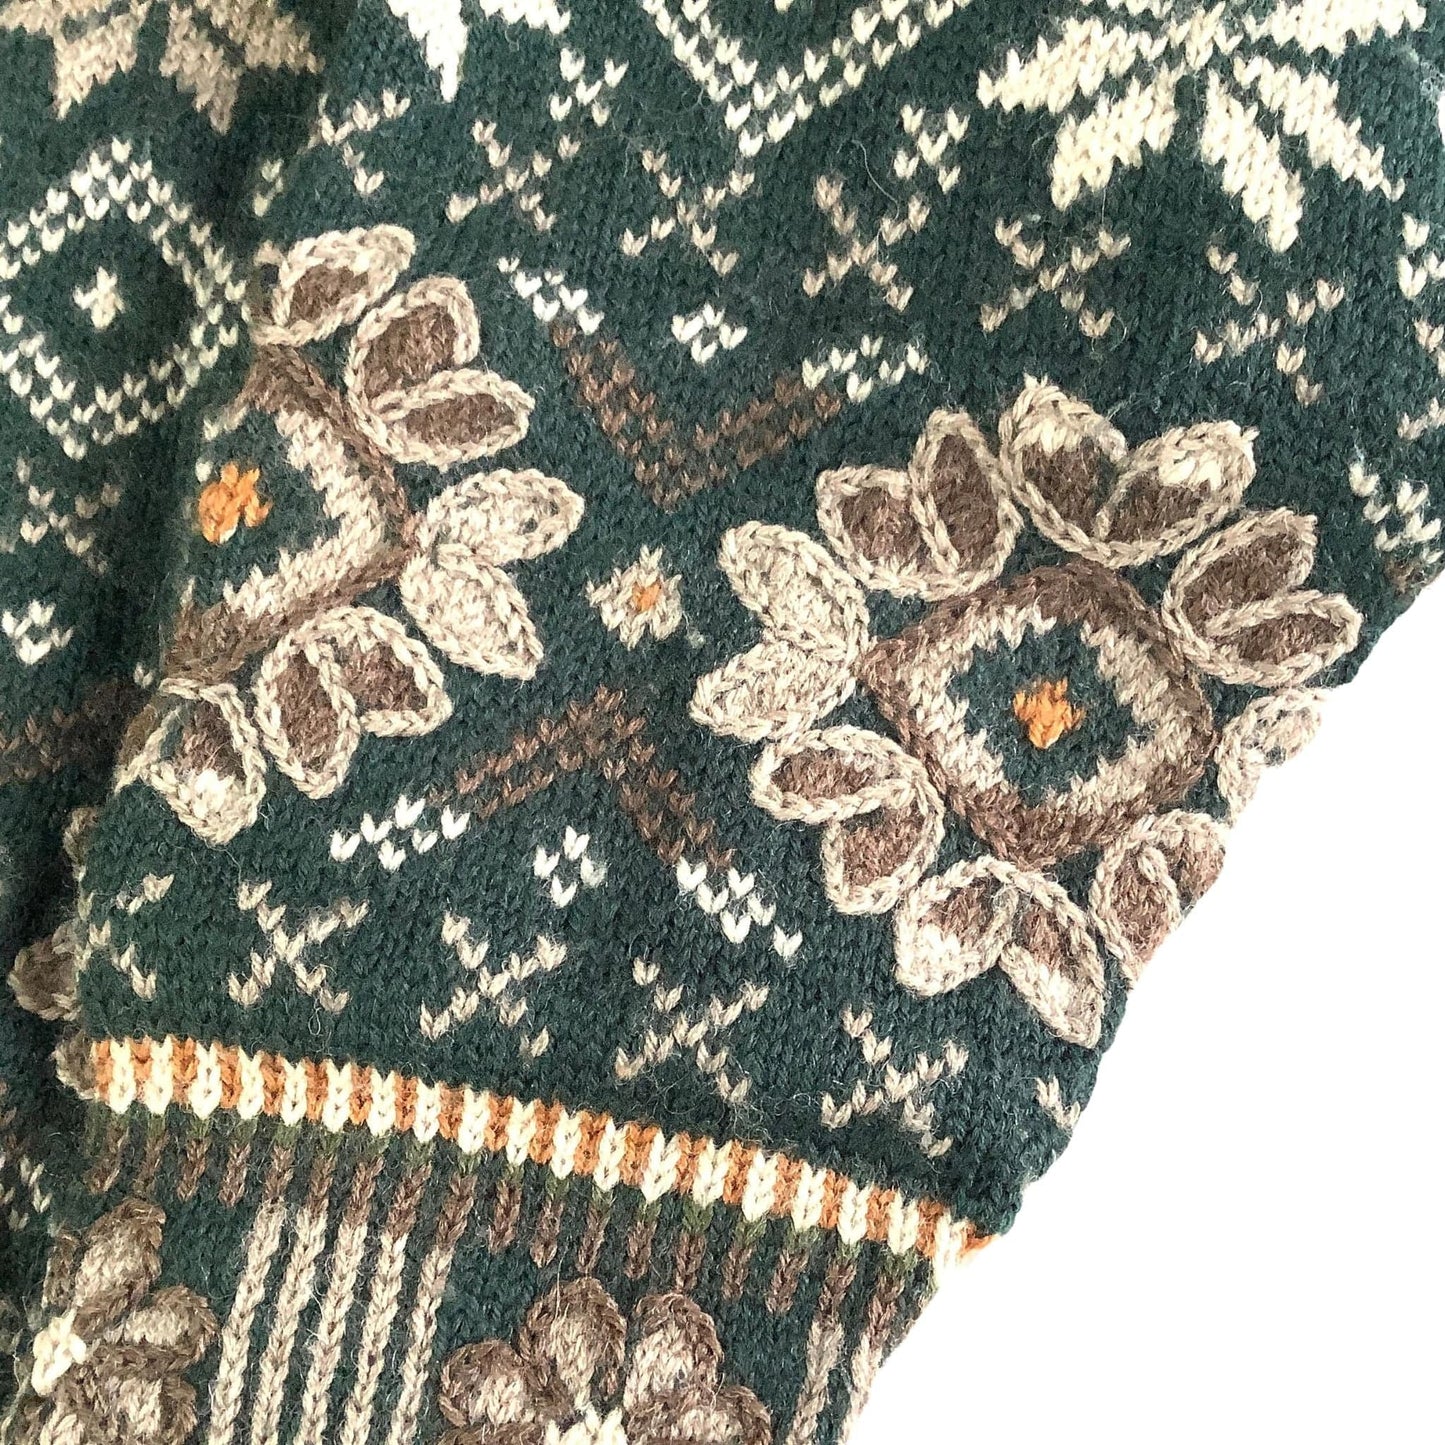 Dale of Norway Cardigan Large / Green / Vintage 1990s